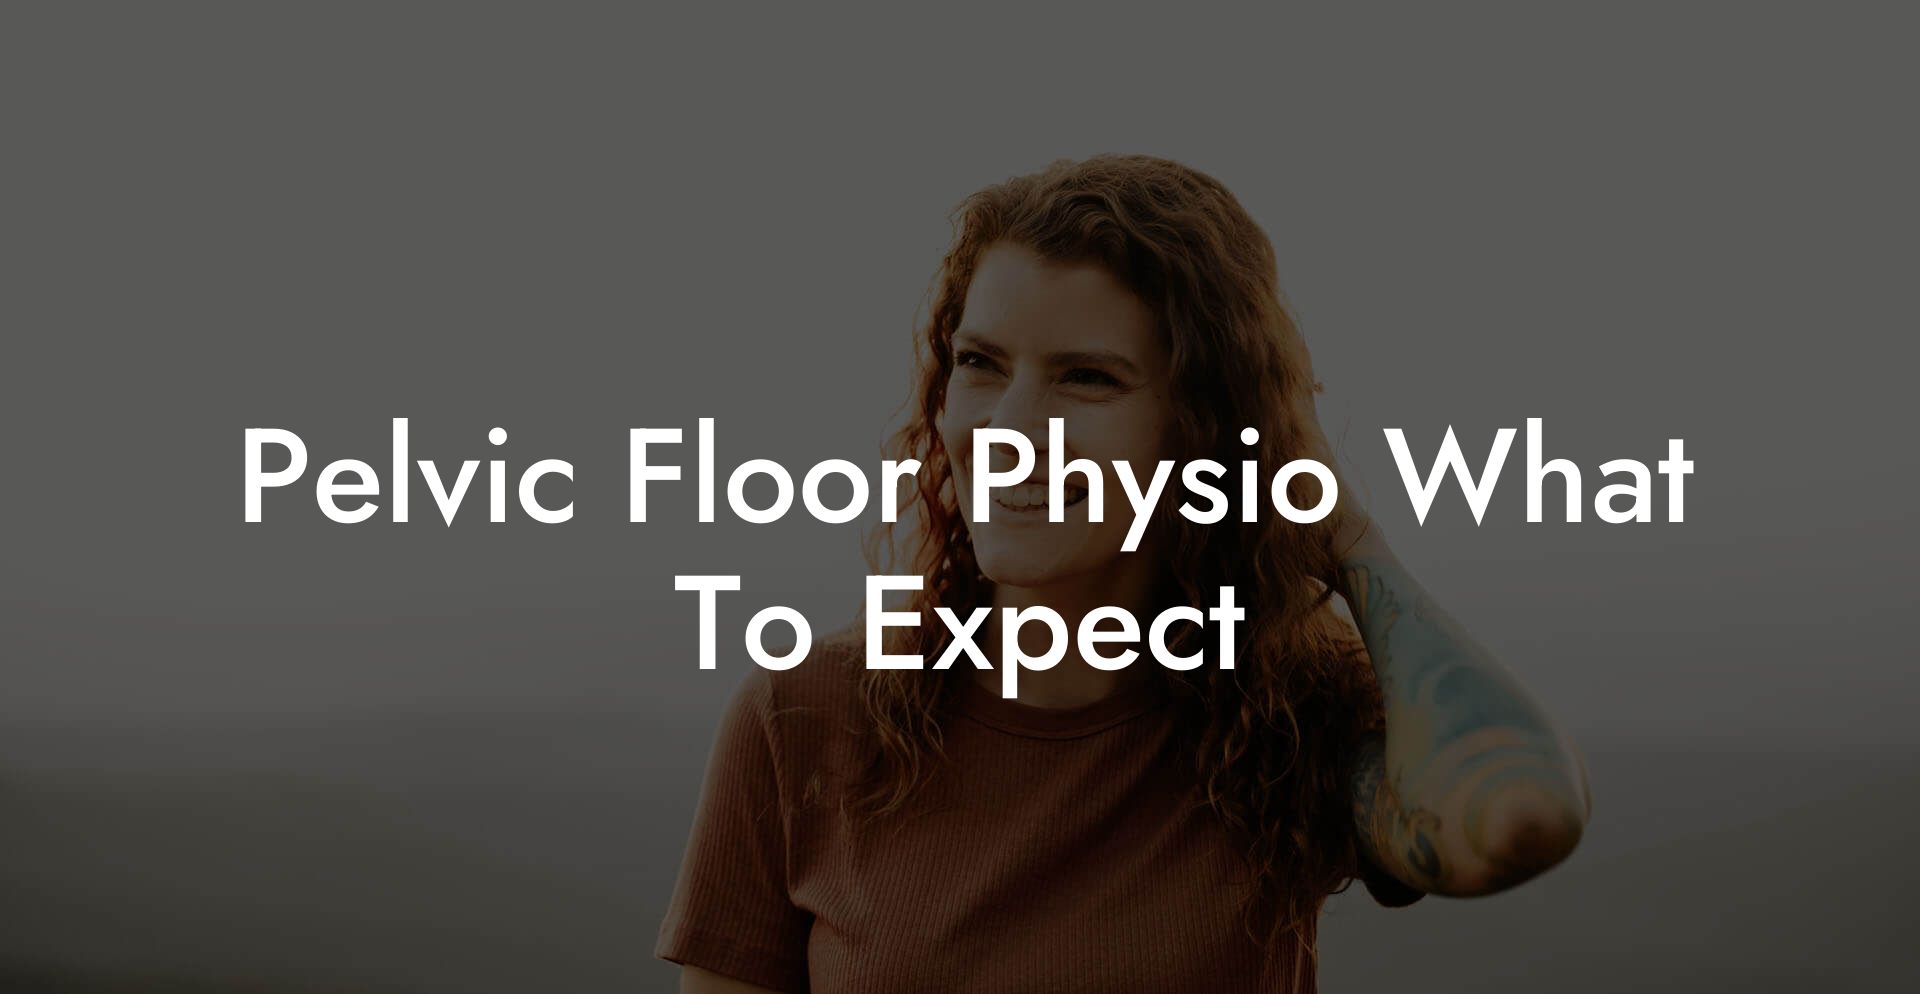 Pelvic Floor Physio What To Expect